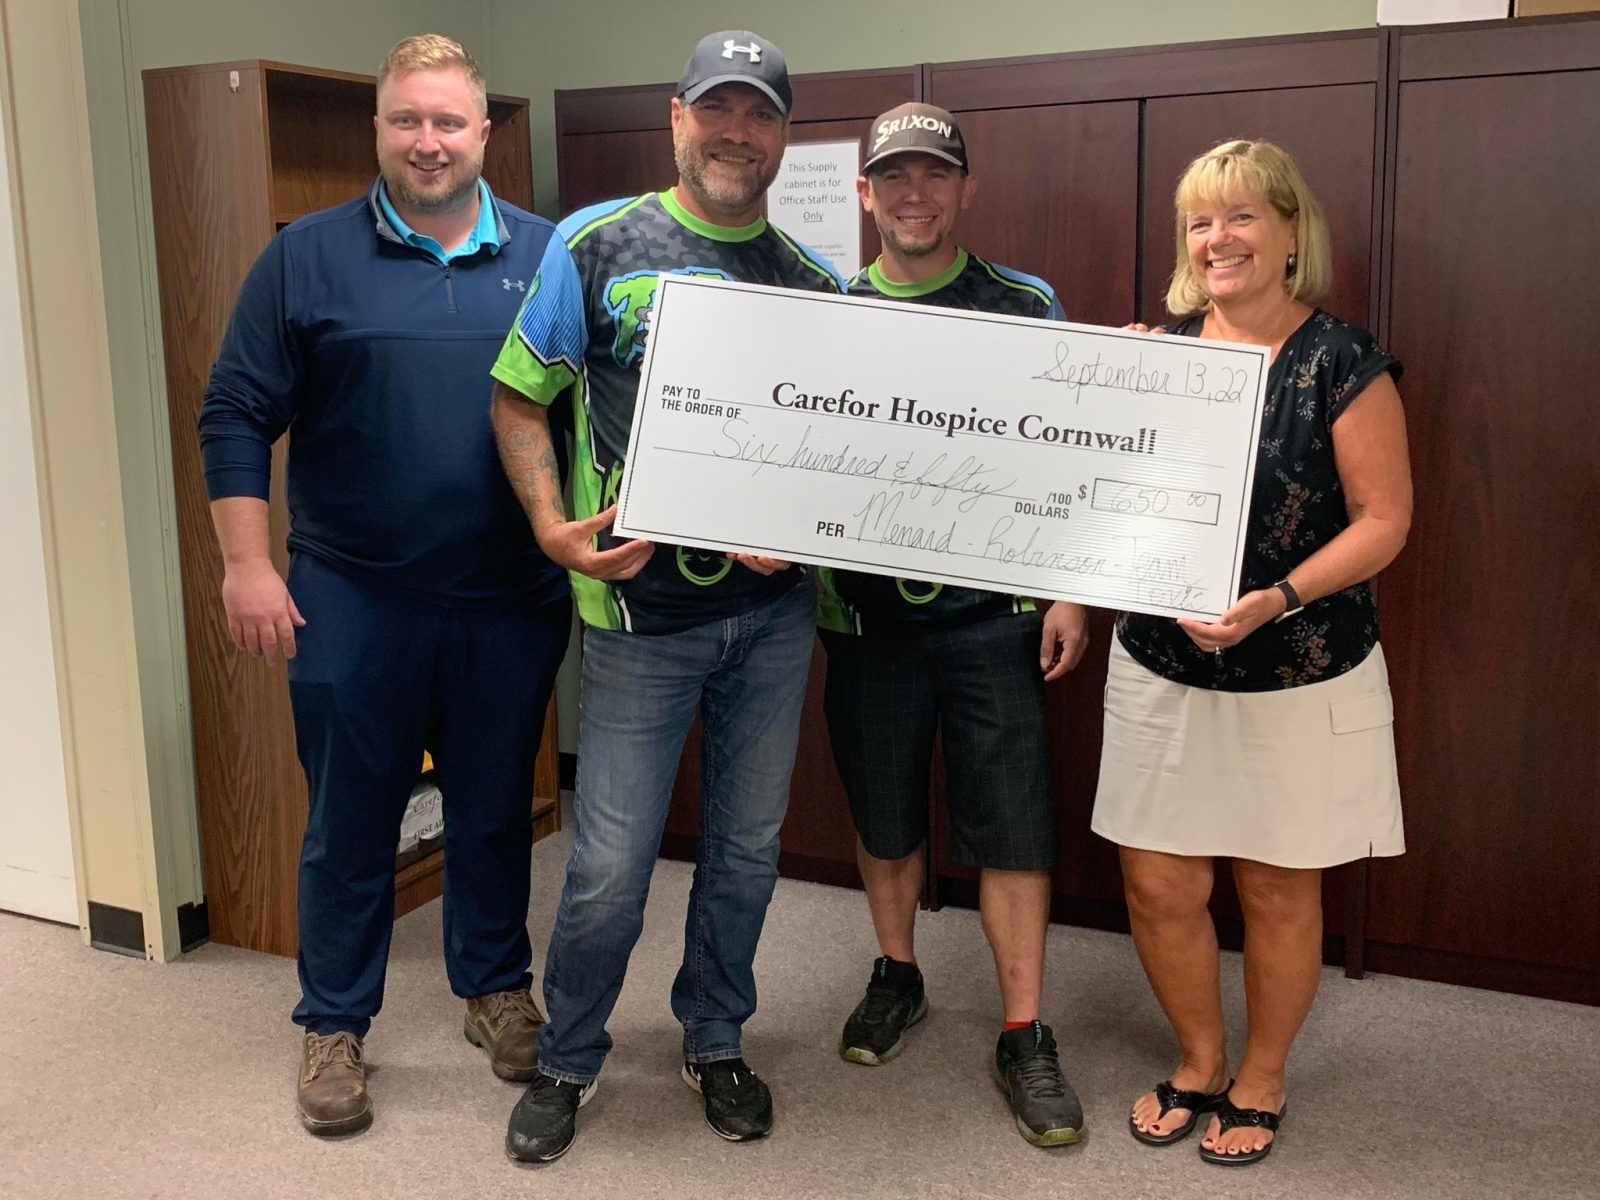 Menard and Robertson’s Charitable Softball League Presents Cheque to Carefor Hospice